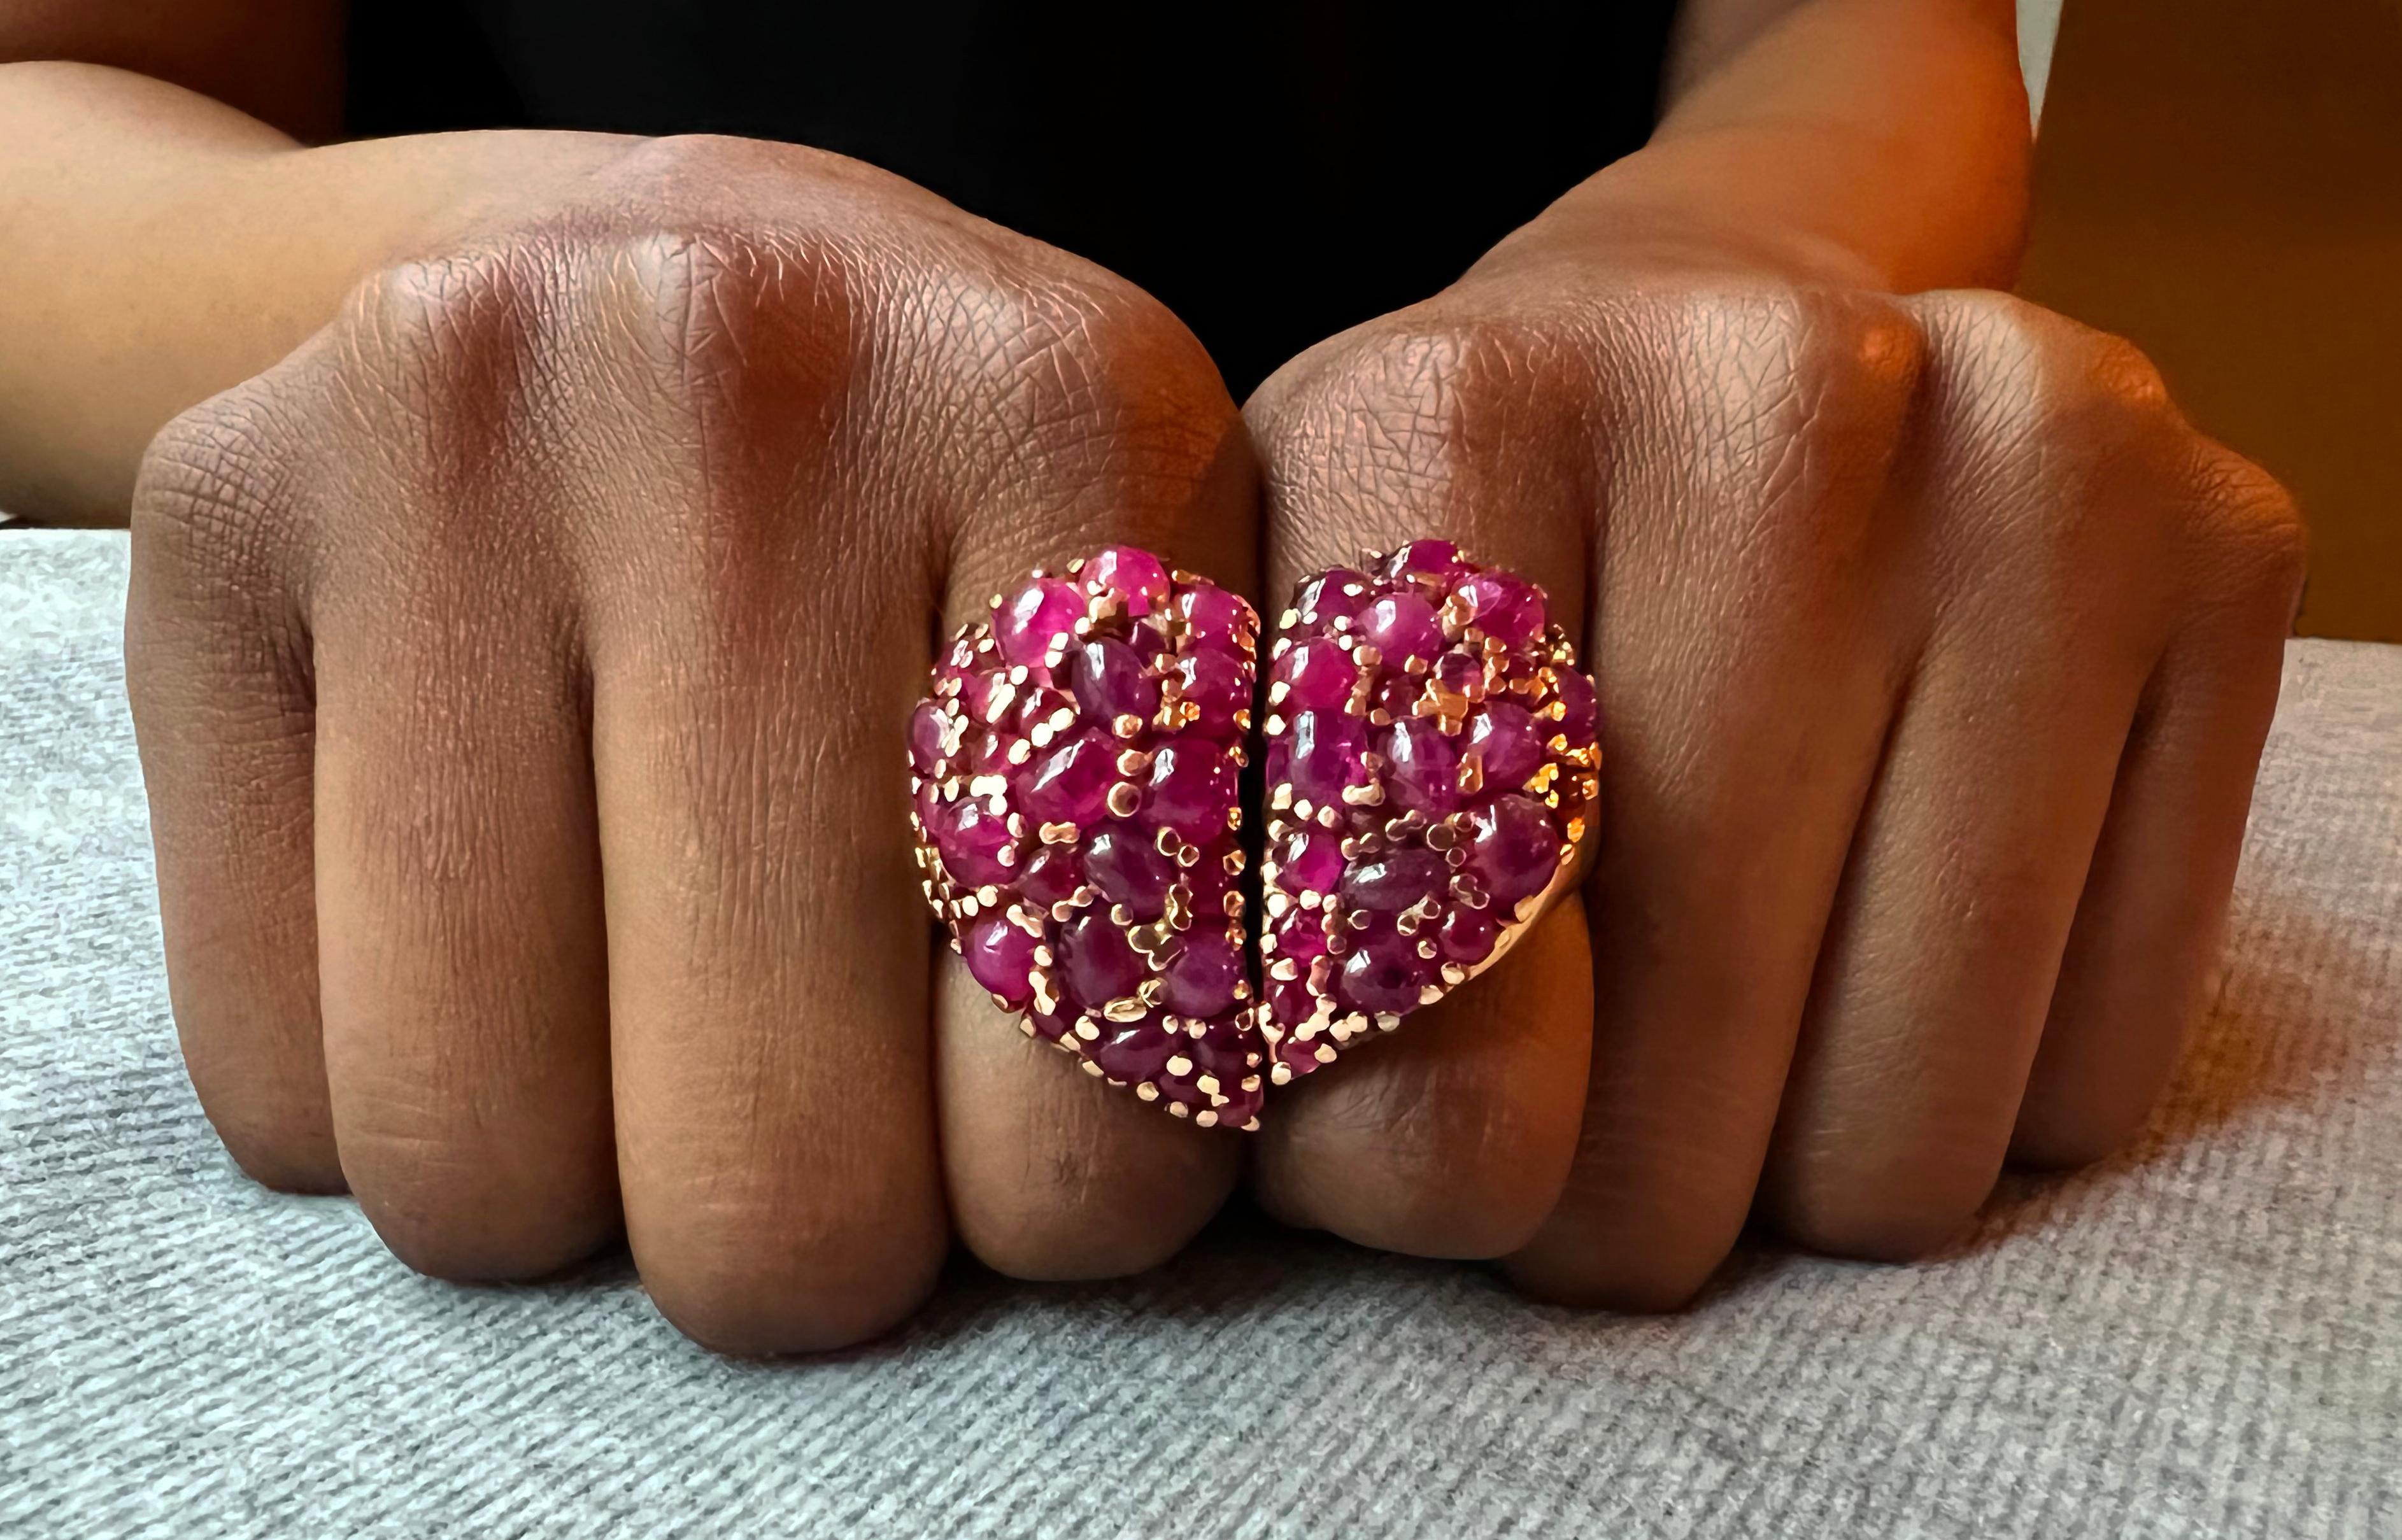 A cabochon ruby and 18 karat yellow gold double finger ring, by Solange Azagury-Partridge, 2002. This is an unforgettable ring, very rarely available, and surprisingly easy to wear. While Solange chose to call it a 